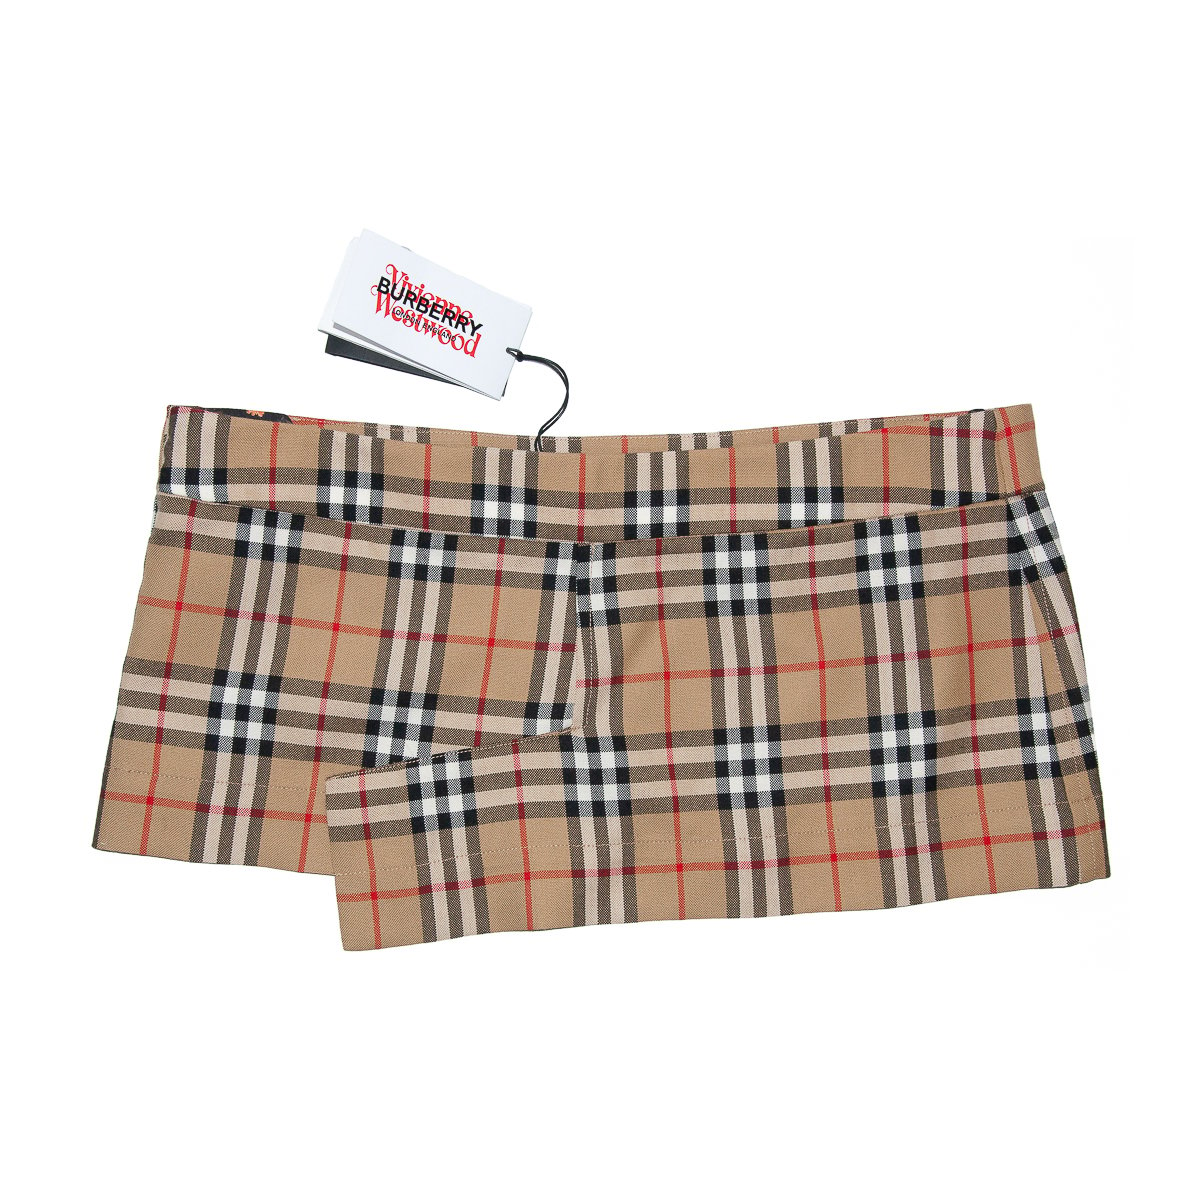 Vivienne Westwood x Burberry Micro Skirt † Ruder Than The Rest